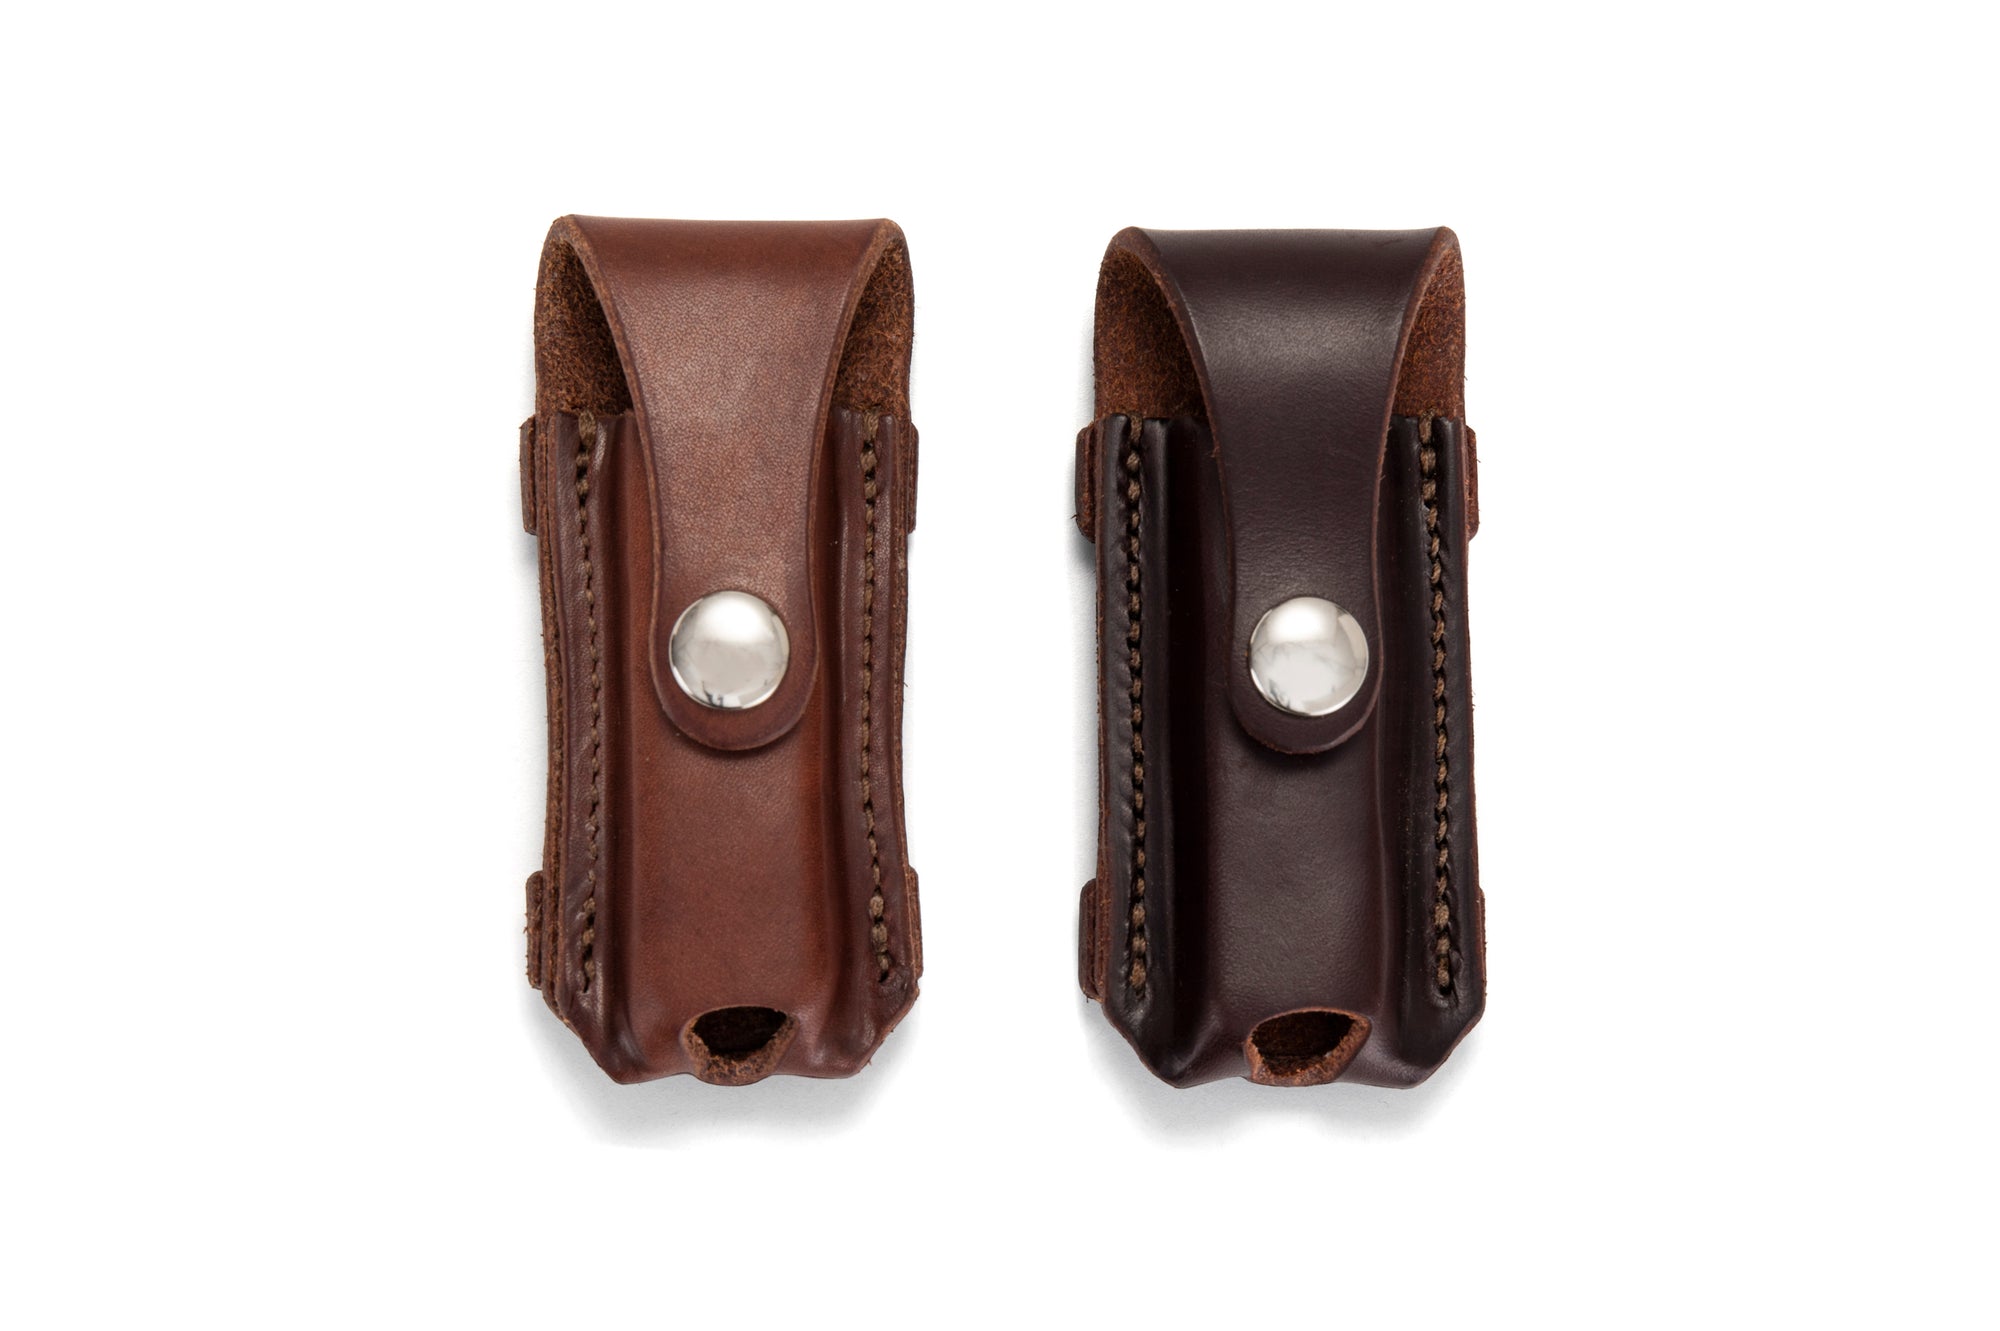 Angus Barrett Button Close Knife Pouch is available in Natural and Dark Natural